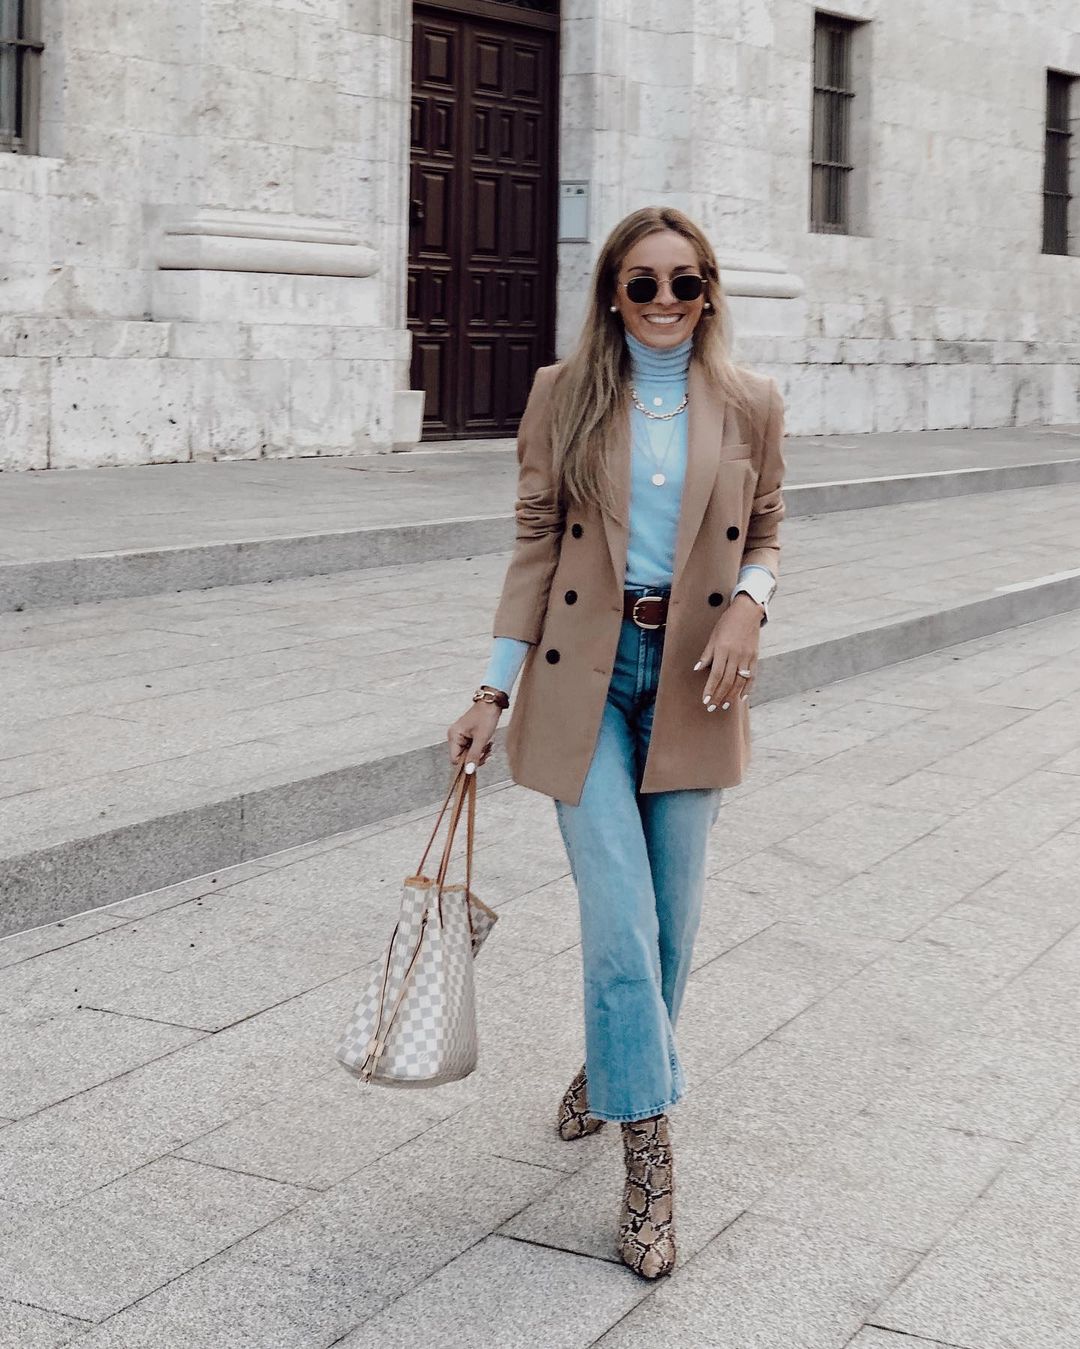 This Outfit Is Ready to Wear Anywhere — @virginiardgcasado Instagram look light blue turtleneck, tan blazer, wide-leg crop jeans, and snakeskin boots